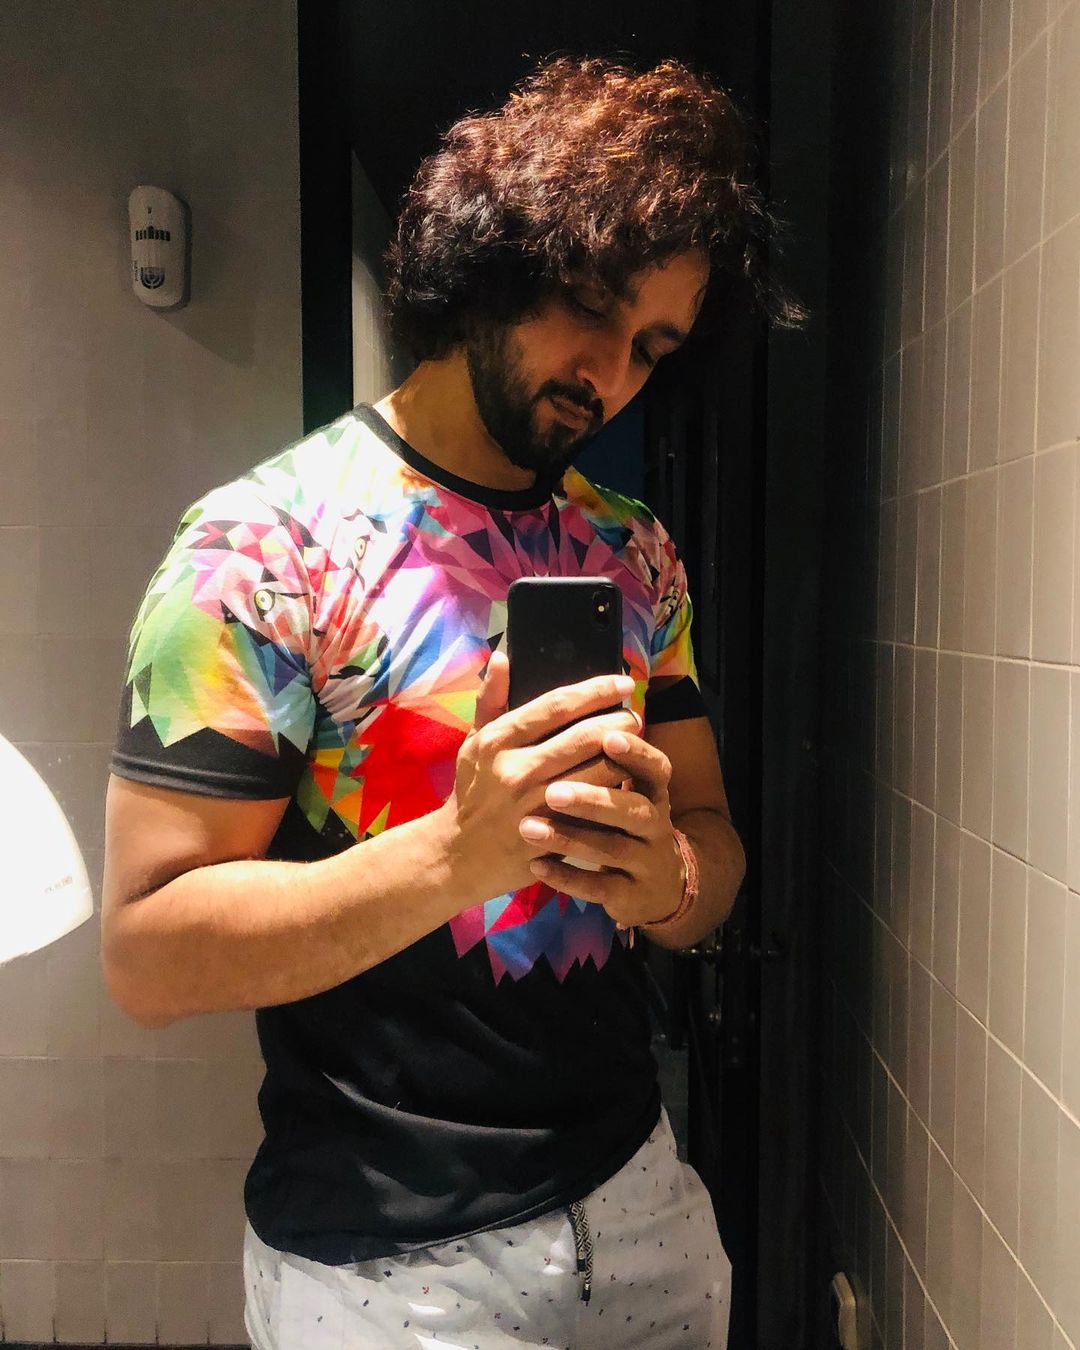 Sourabh Raaj Jain snaps a mirror selfie in October 2019. The room is dark, with mushroom coloured tiles, and is lit only from directly above and to one side. Sourabh has long dark curly hair and a thick, trimmed beard and moustache, and is wearing a black and multicoloured t-shirt and white patterned trousers. He is looking at his smartphone.